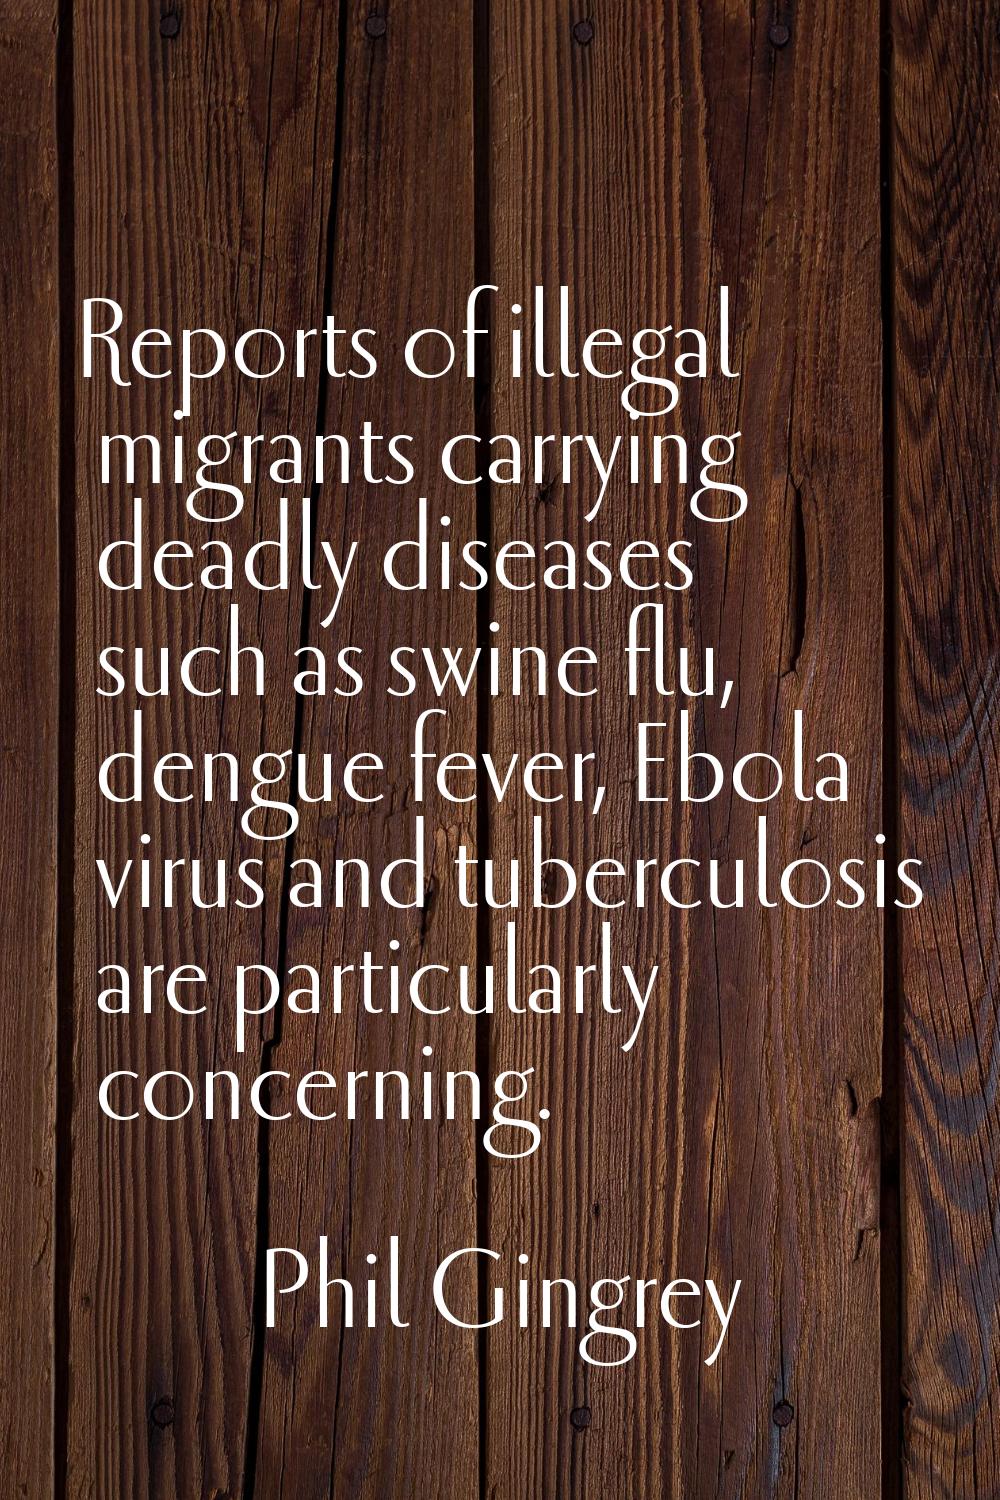 Reports of illegal migrants carrying deadly diseases such as swine flu, dengue fever, Ebola virus a